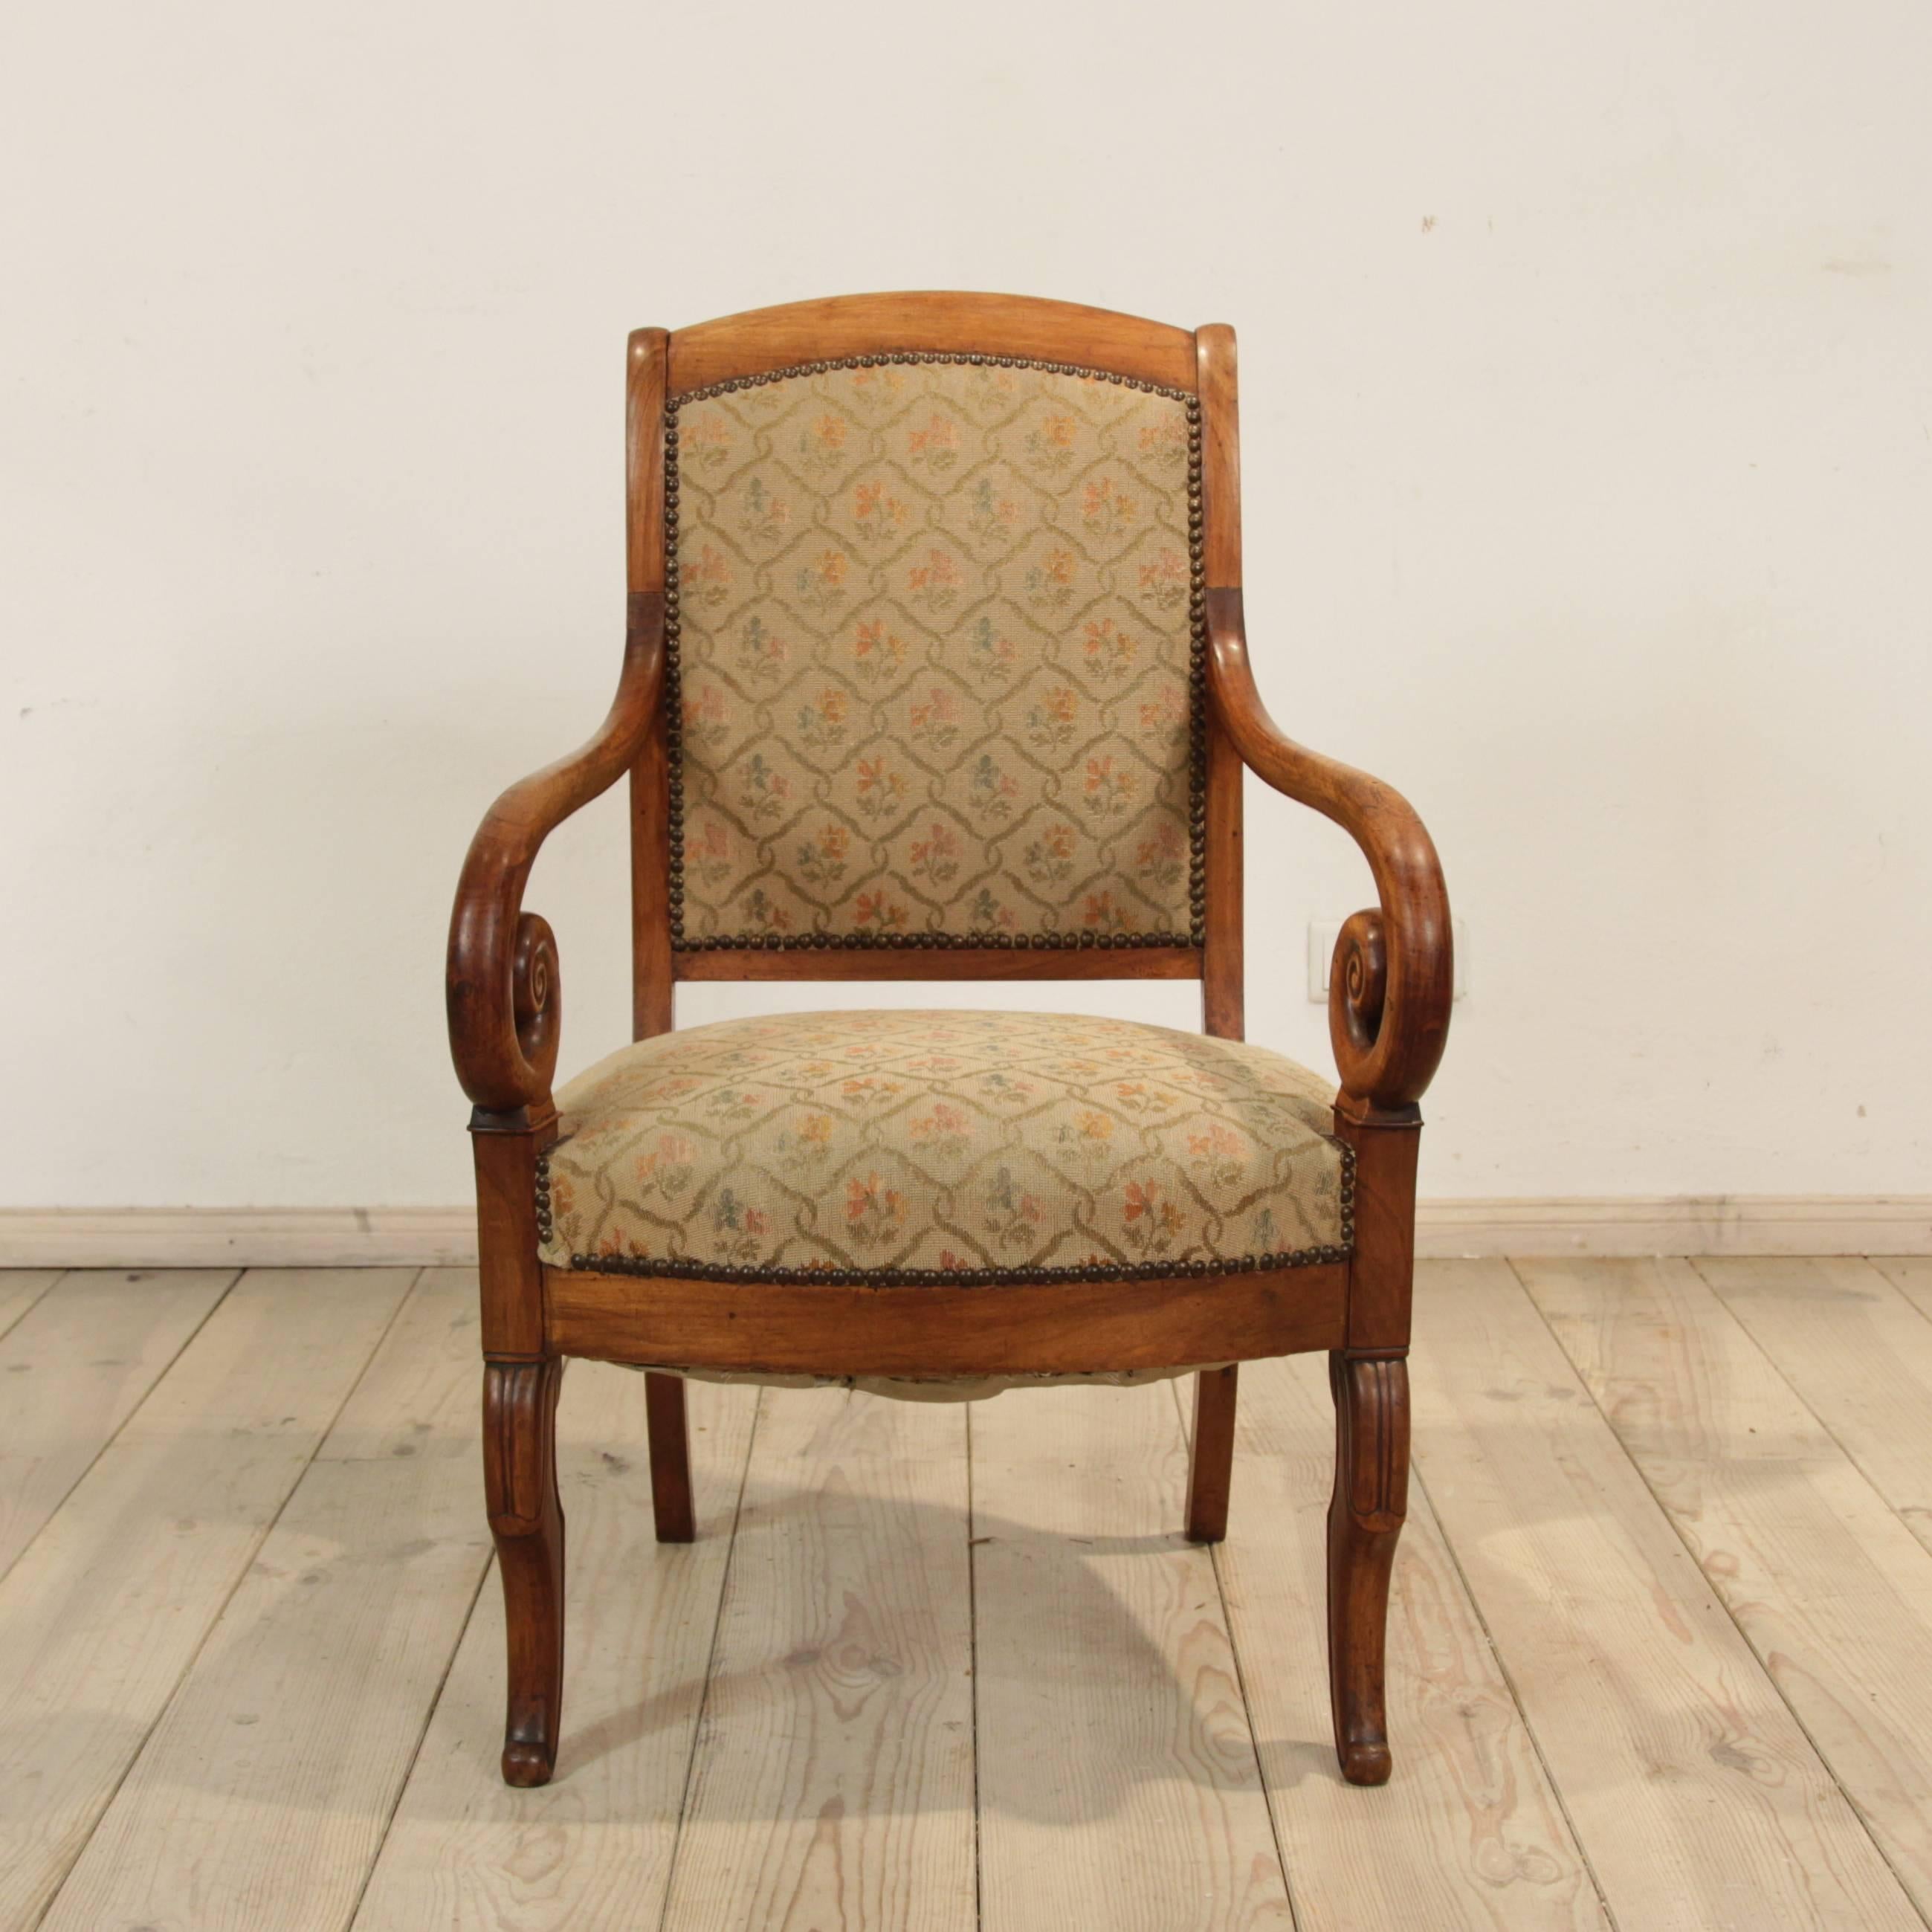 Fine antique French armchair, circa 1840. Beautiful lines with nice carving, curved back and cabriole legs. Rich and deep patina with the original upholstery. Excellent condition. A very comfortable and unique piece.